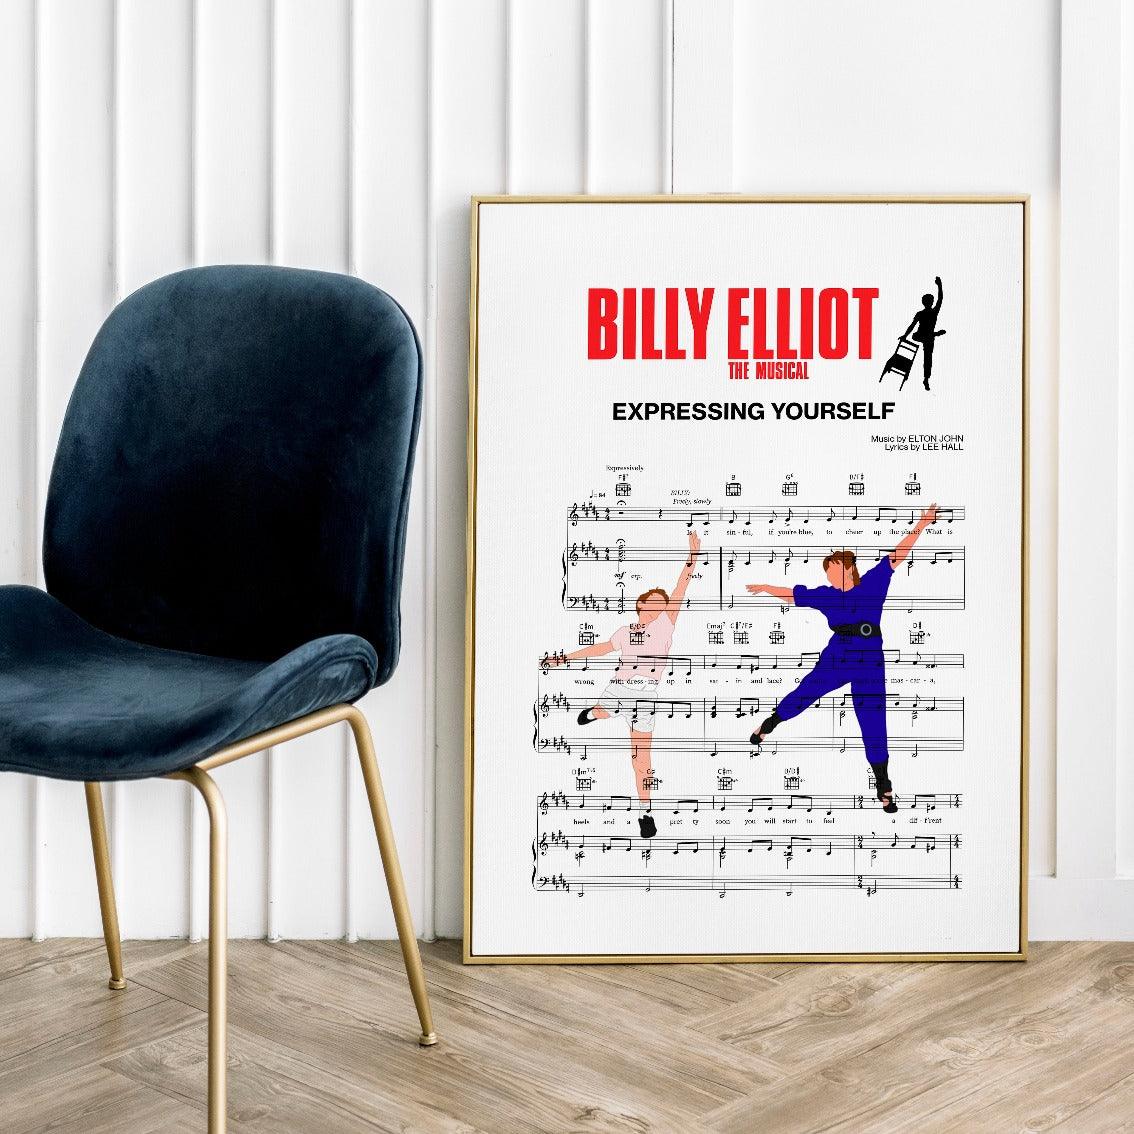 Make a statement in any room with this unique print. This electrifying print is a must-have for any fan of the movie Billy Elliot. With the title spelled out in bright blue letters, this poster is perfect for any music lover or movie buff. Measuring in at 18"x24", this print is perfect for any empty wall space. Hang it in your living room, kitchen, or bedroom for a little bit of movie magic.